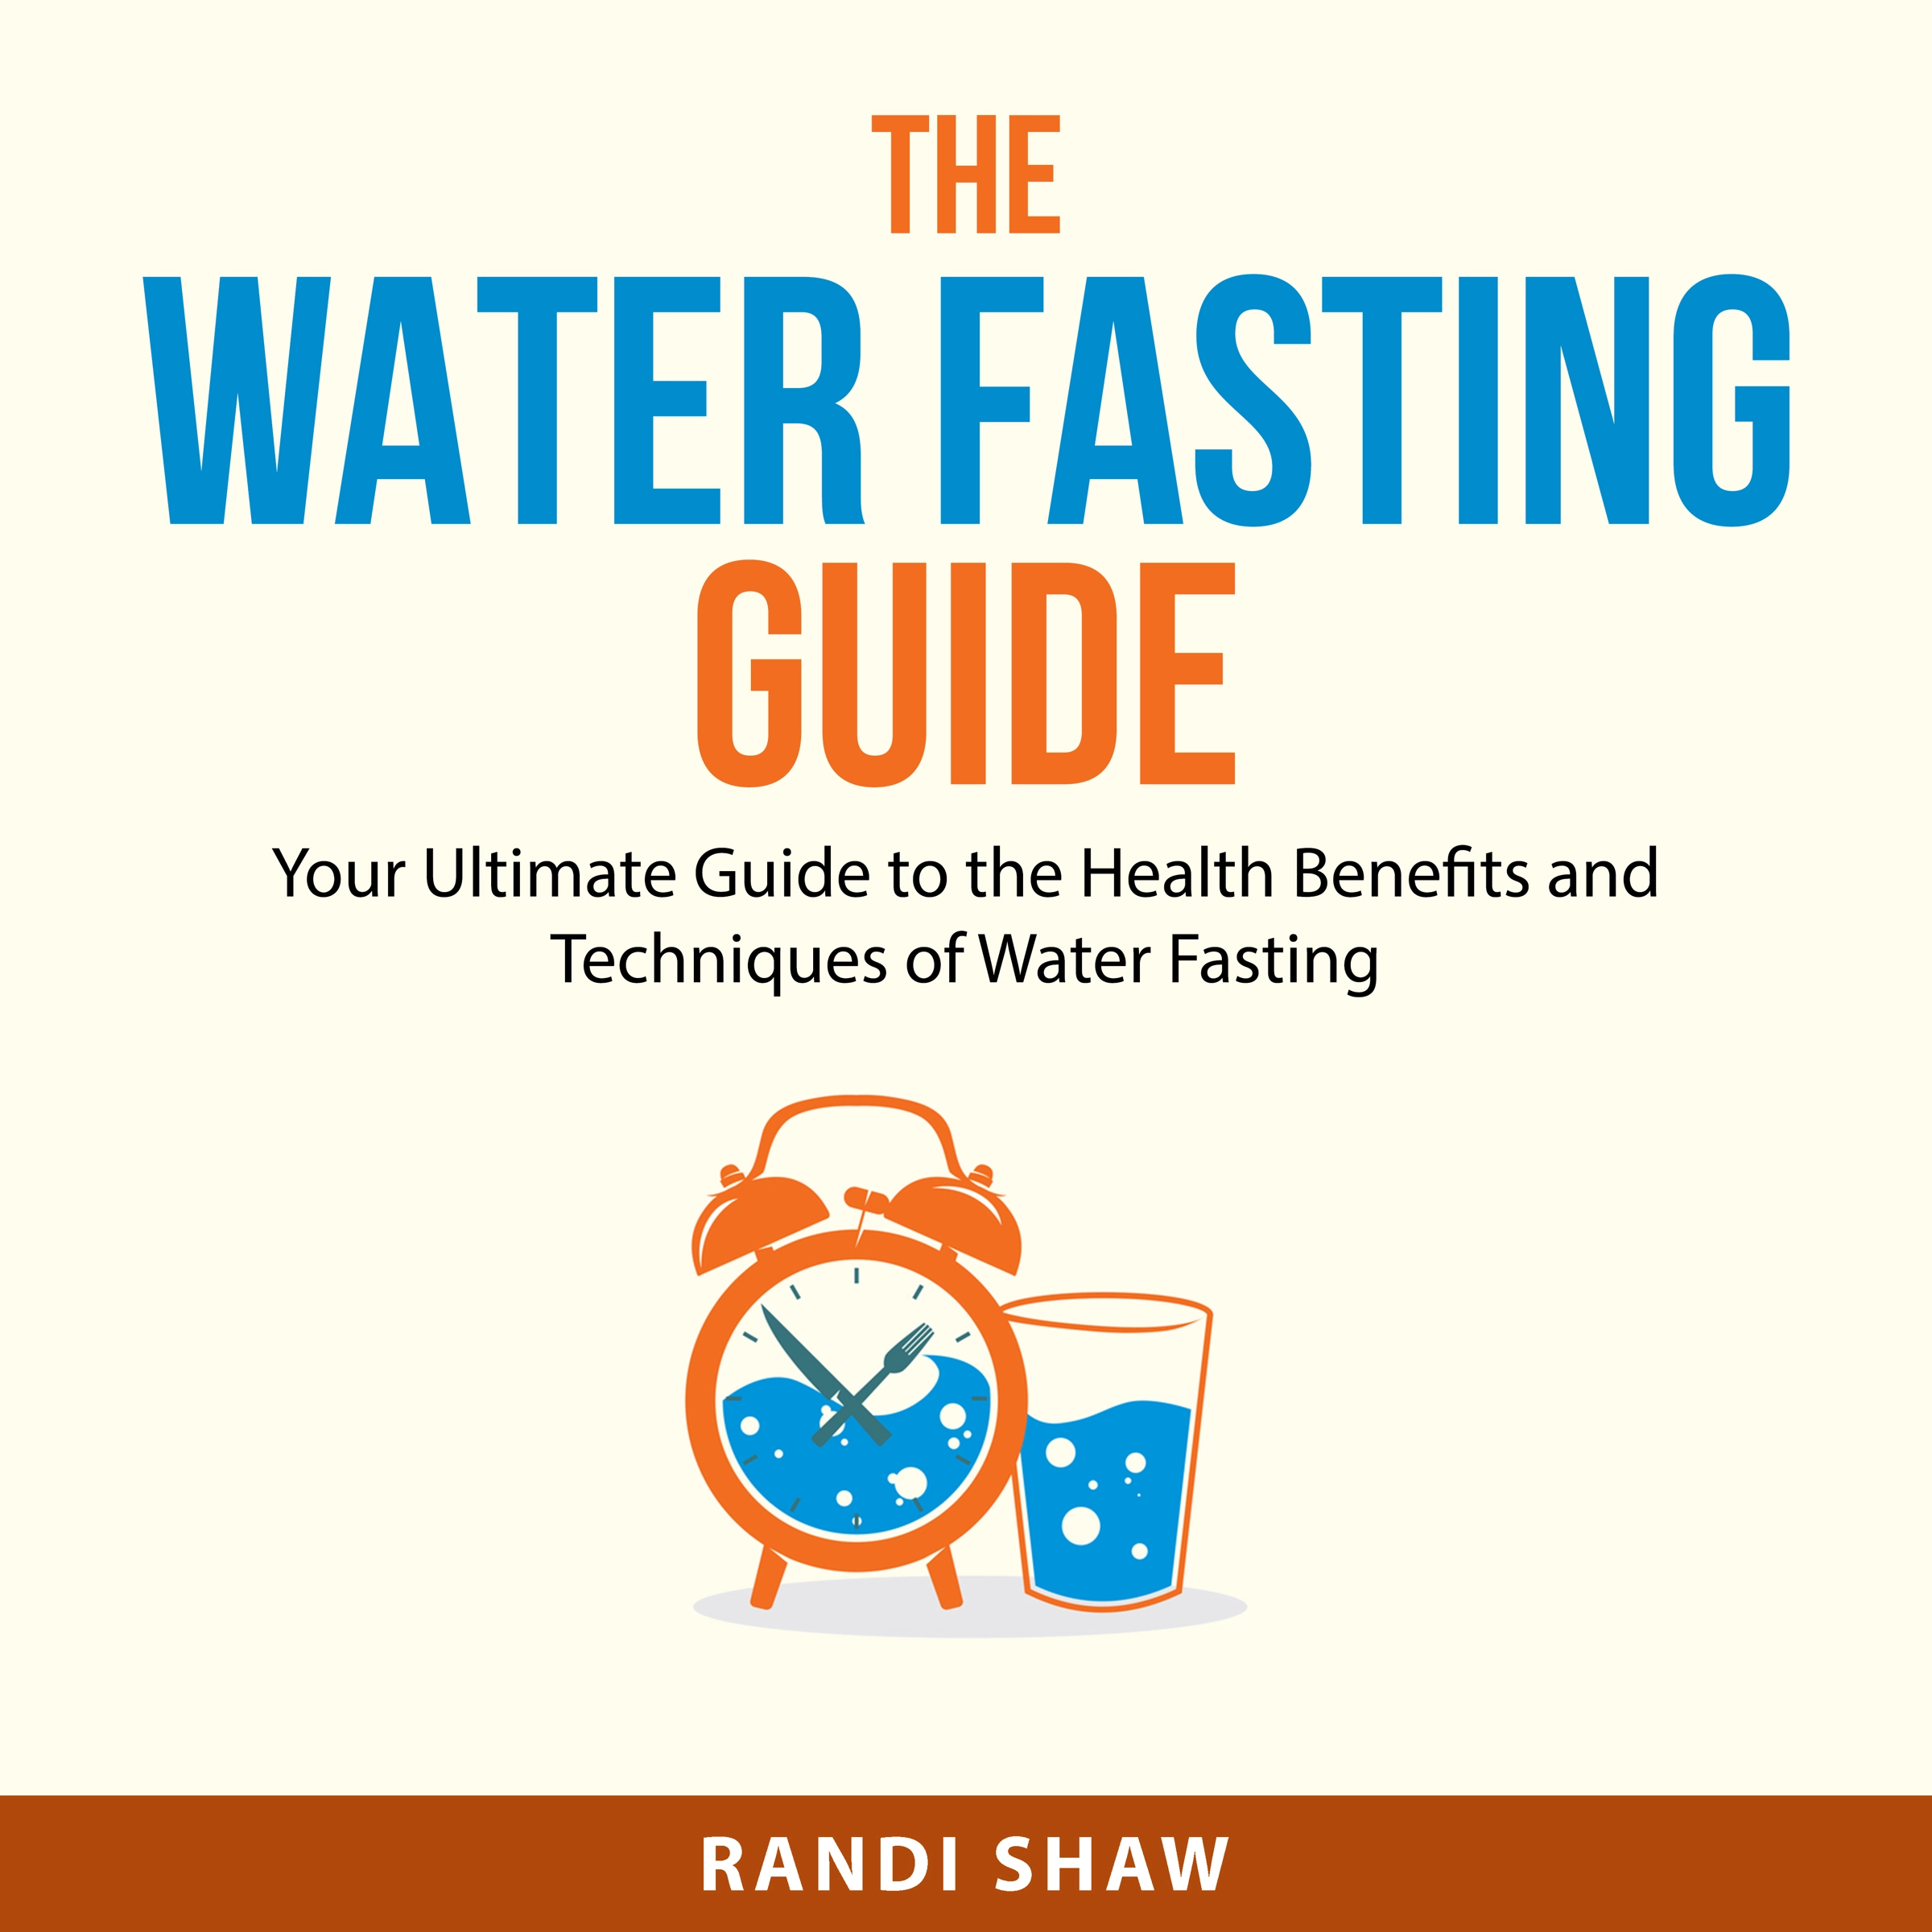 The Water Fasting Guide Audiobook by Randi Shaw